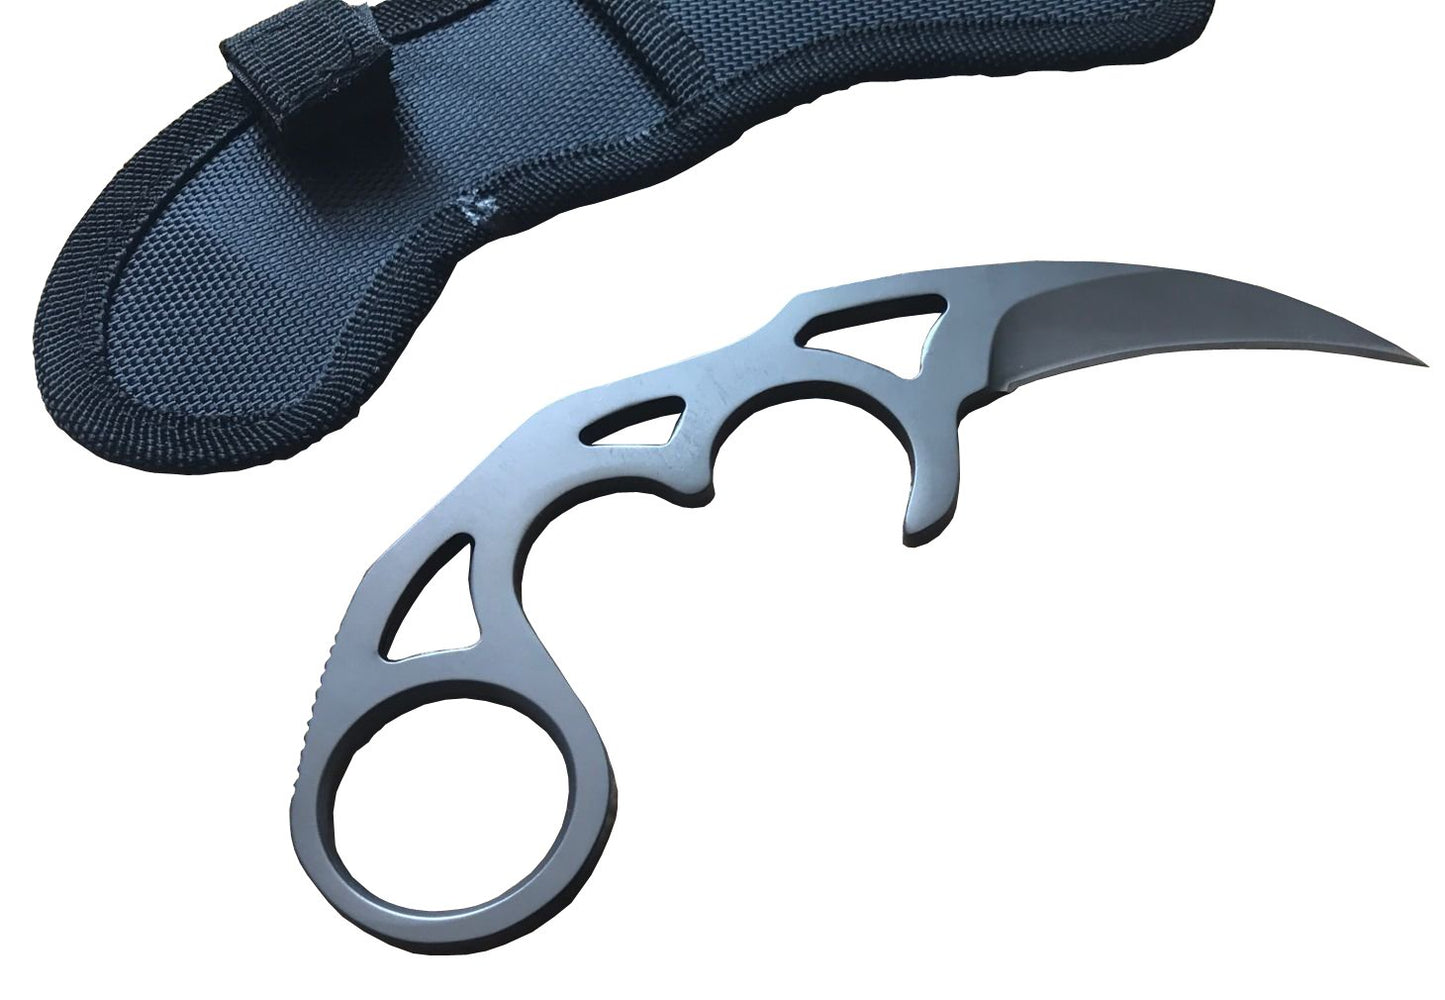 MASALONG Claw Knife counter strike Karambit  Camp Hunting Survival Tools Outdoor Tactical Fixed Blade Knives